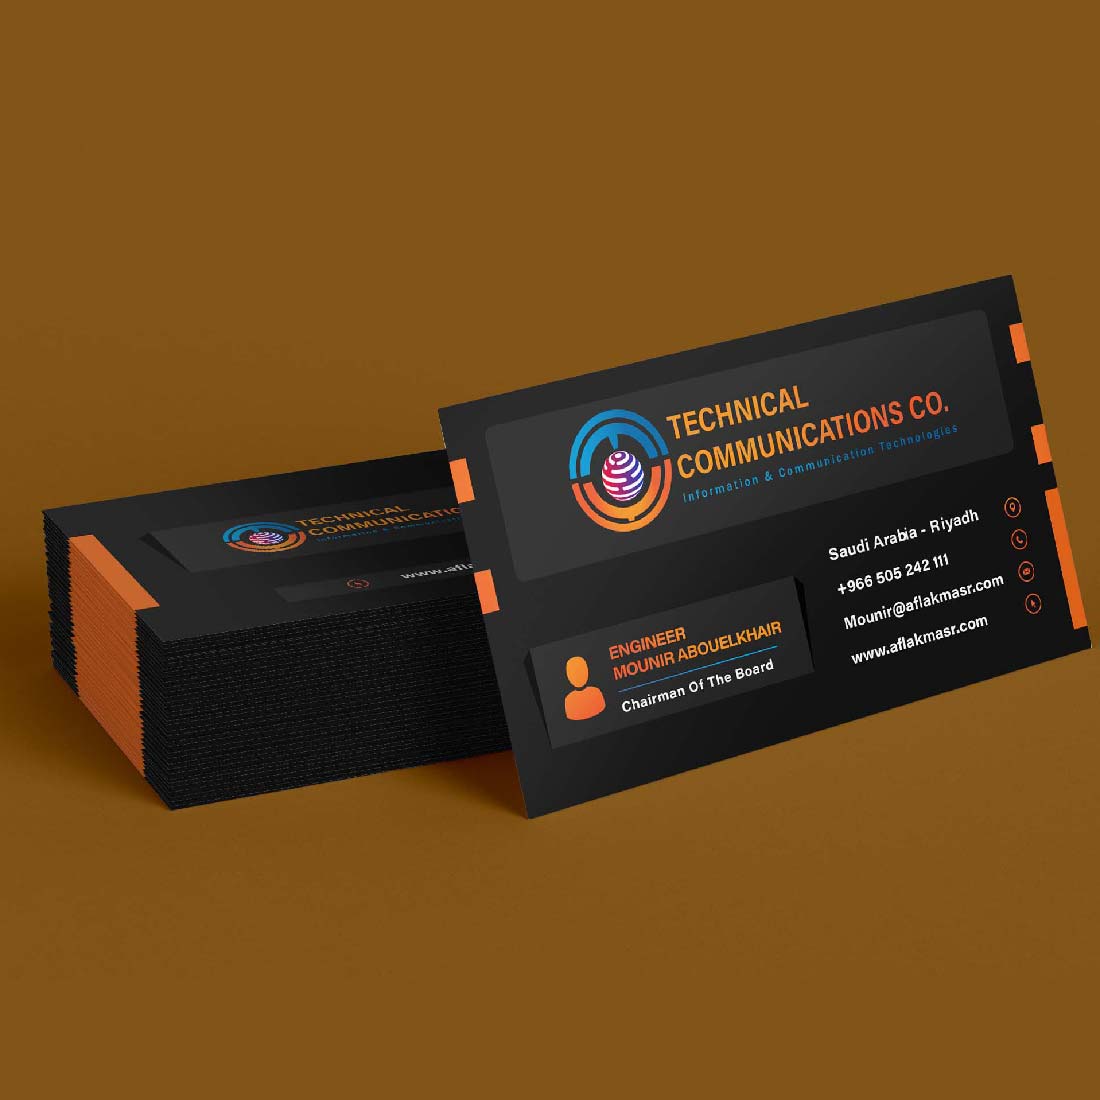 Minimalistic business cards with orange lines and logo.